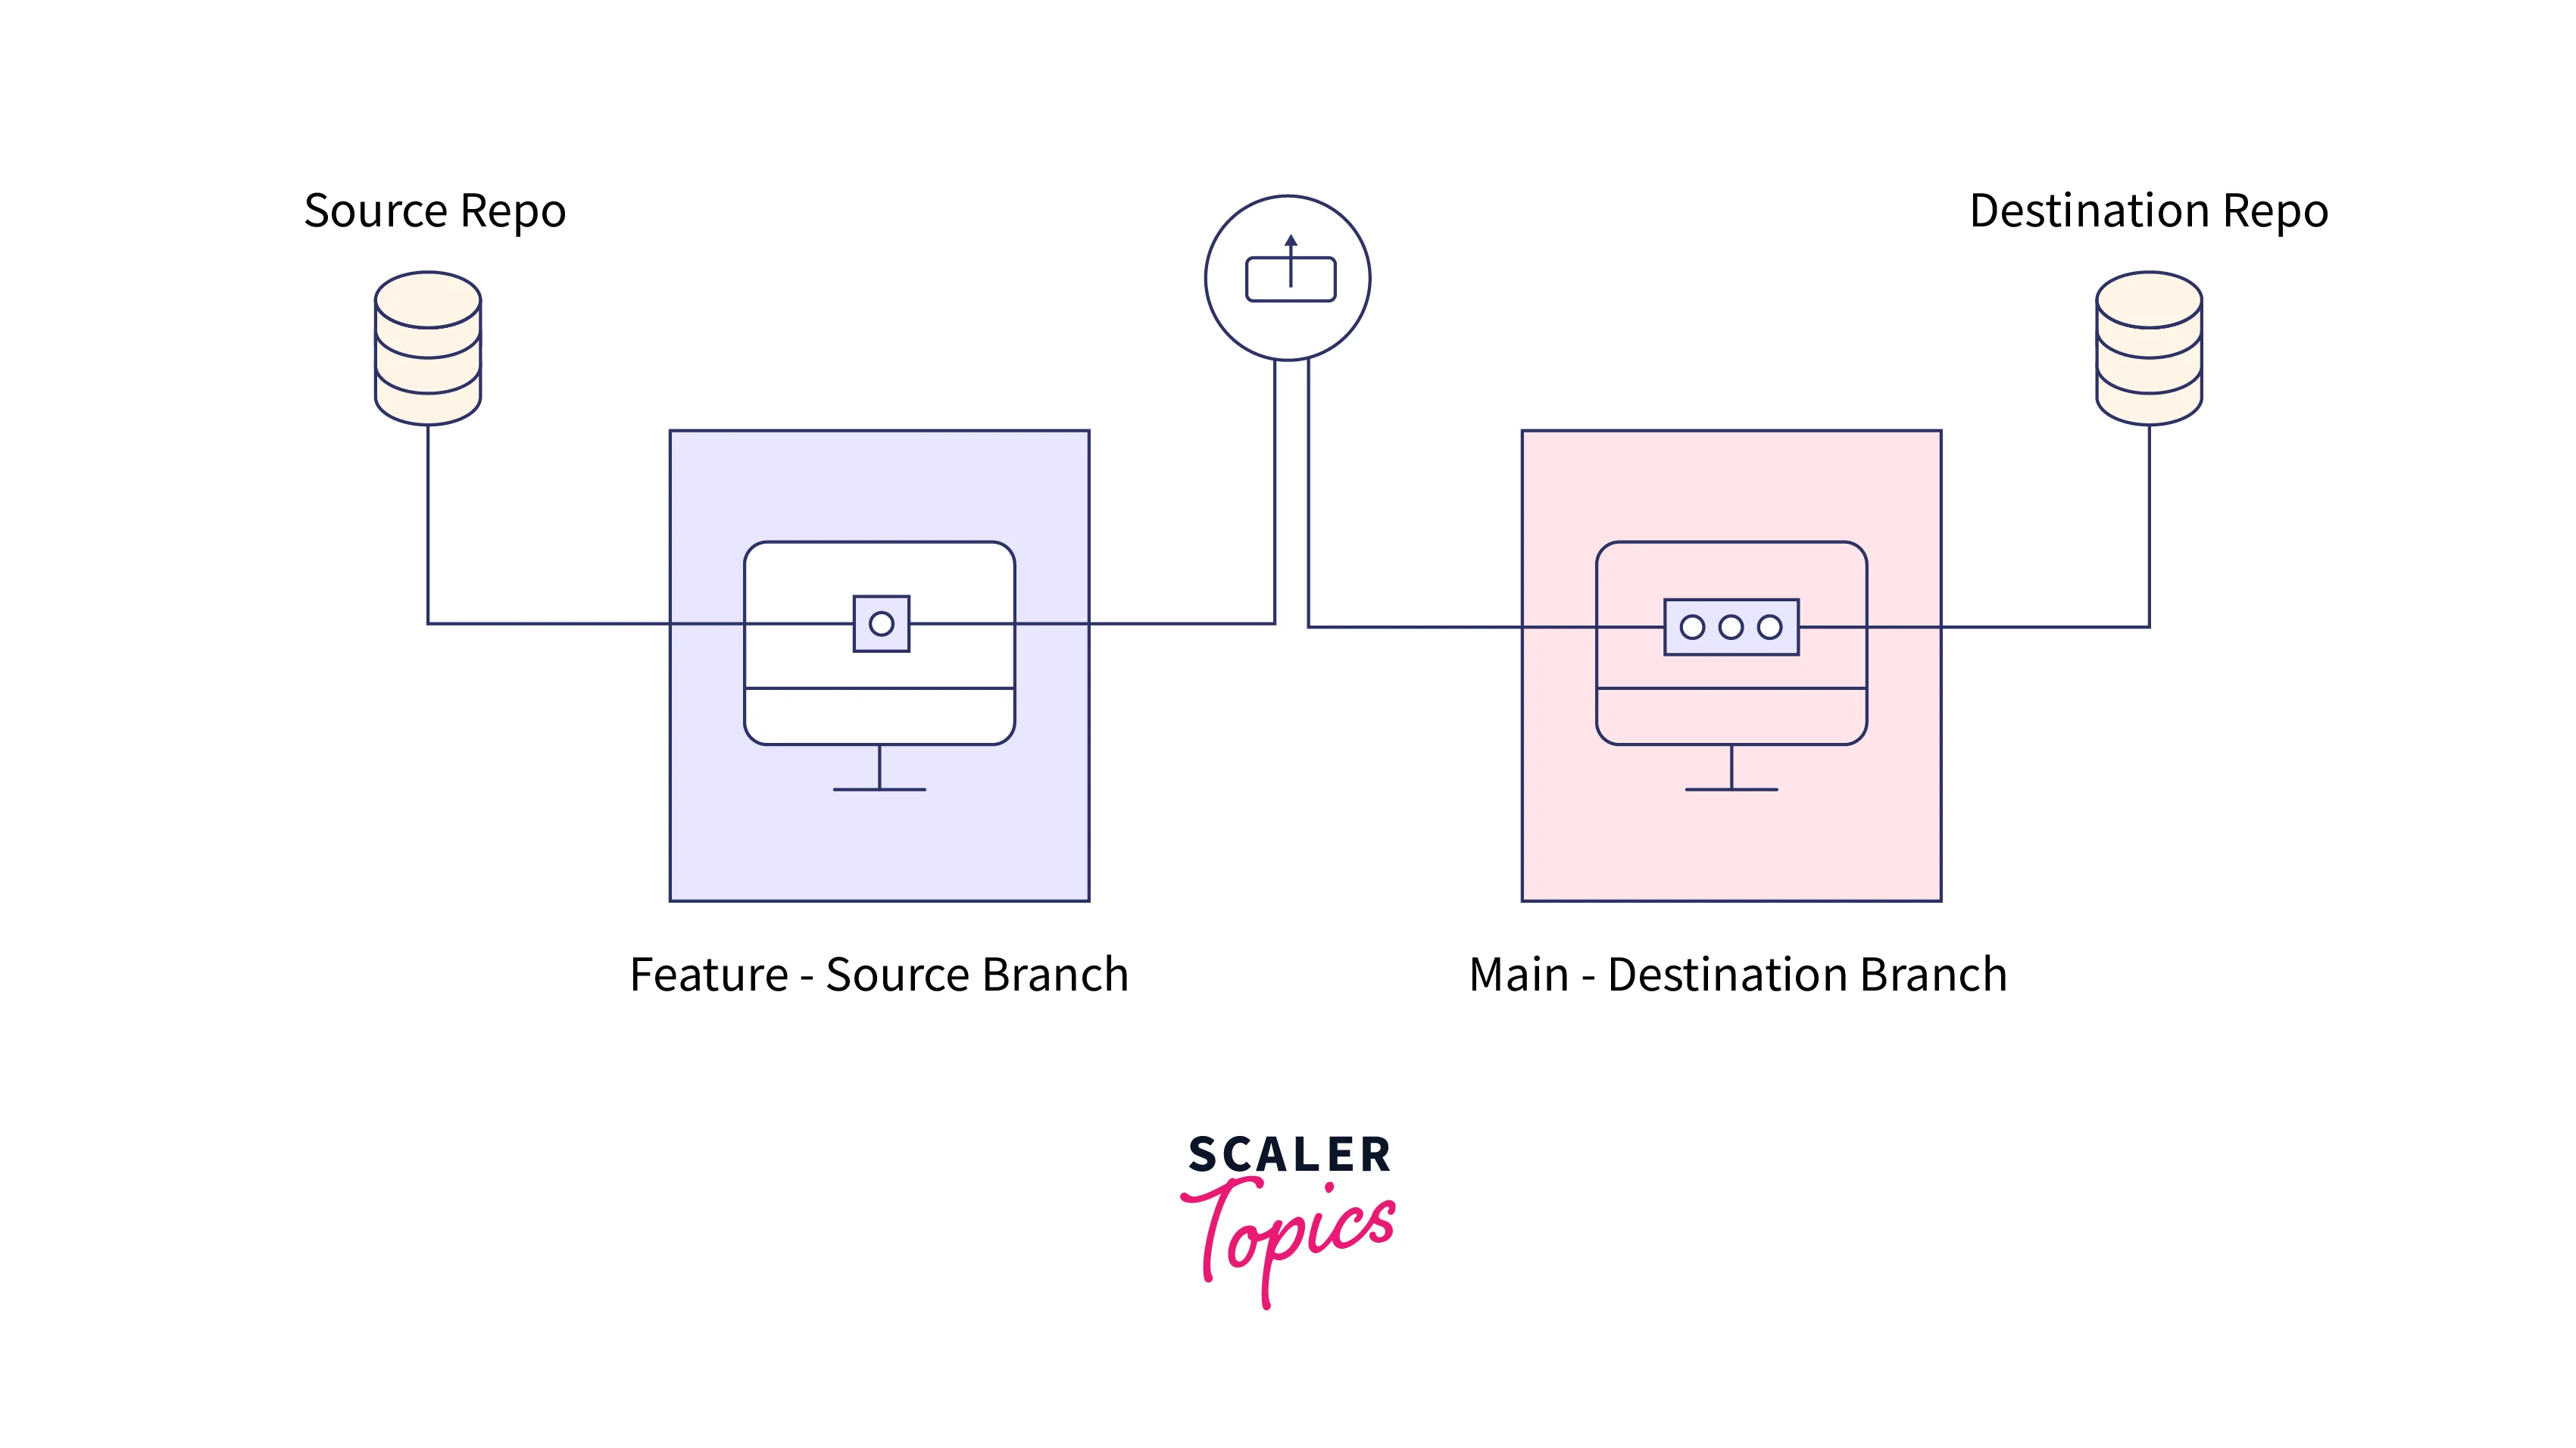 Connection between the source repository, source branch, destination repo, and destination branch during the pull requests